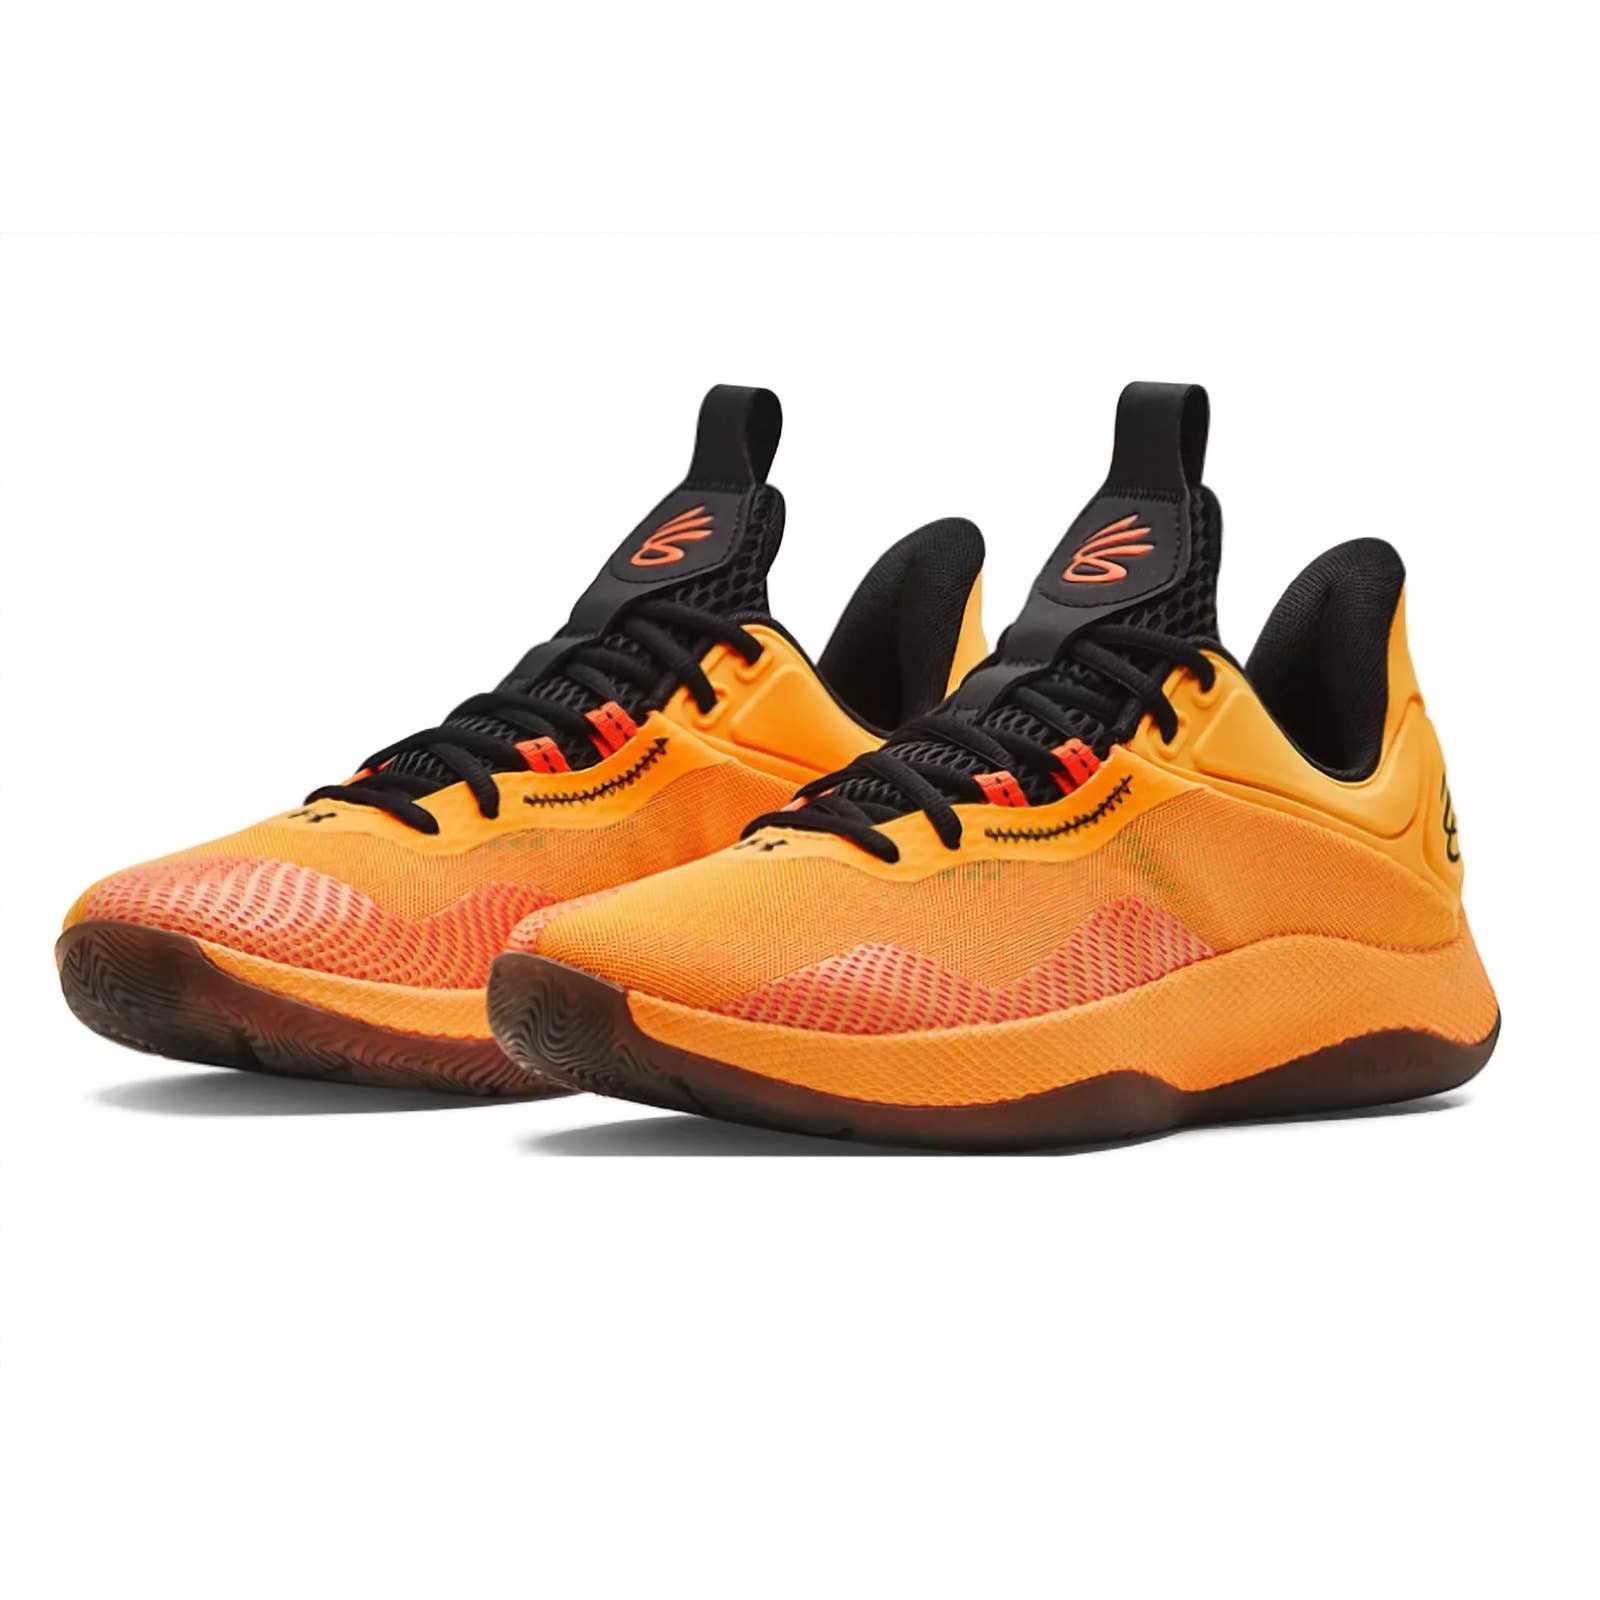 Under Armour Unisex Curry Hovr Splash 2 Basketball Shoes In Orange